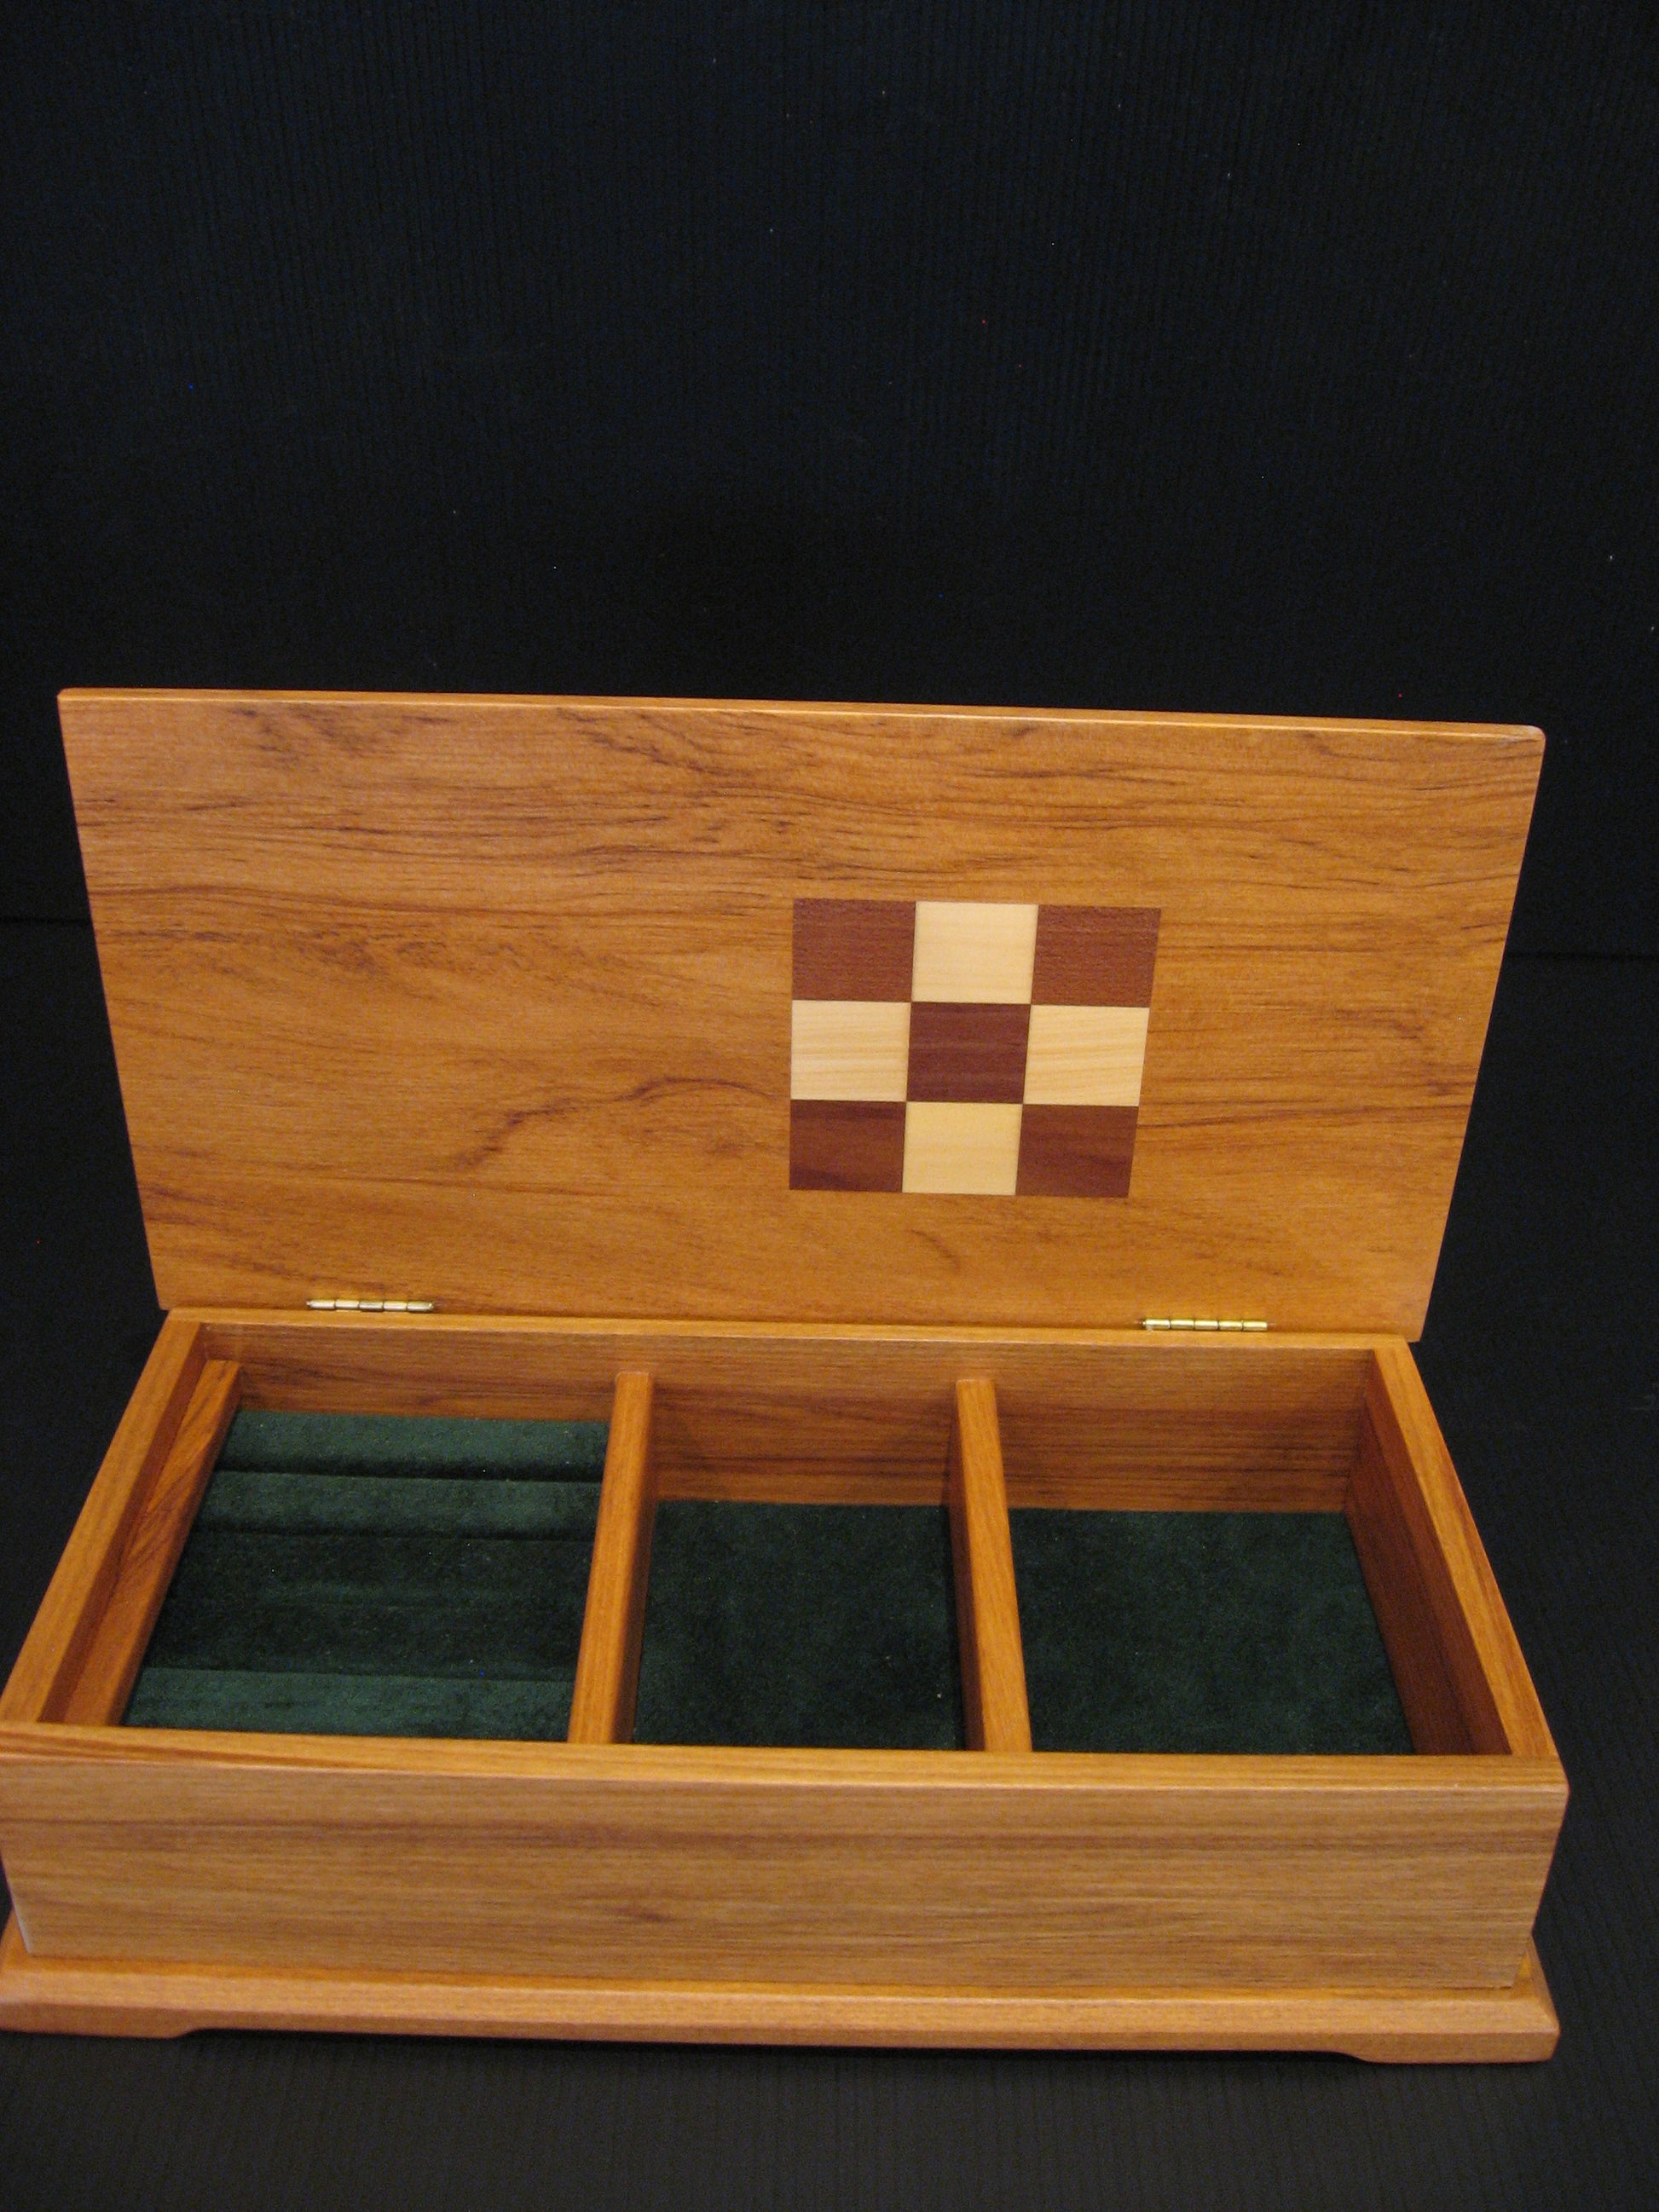 Inside of Rimu Wood Jewellery Box with Inlaid Wood from Native Timbers by Timber Arts NZ Silver Fern Gallery